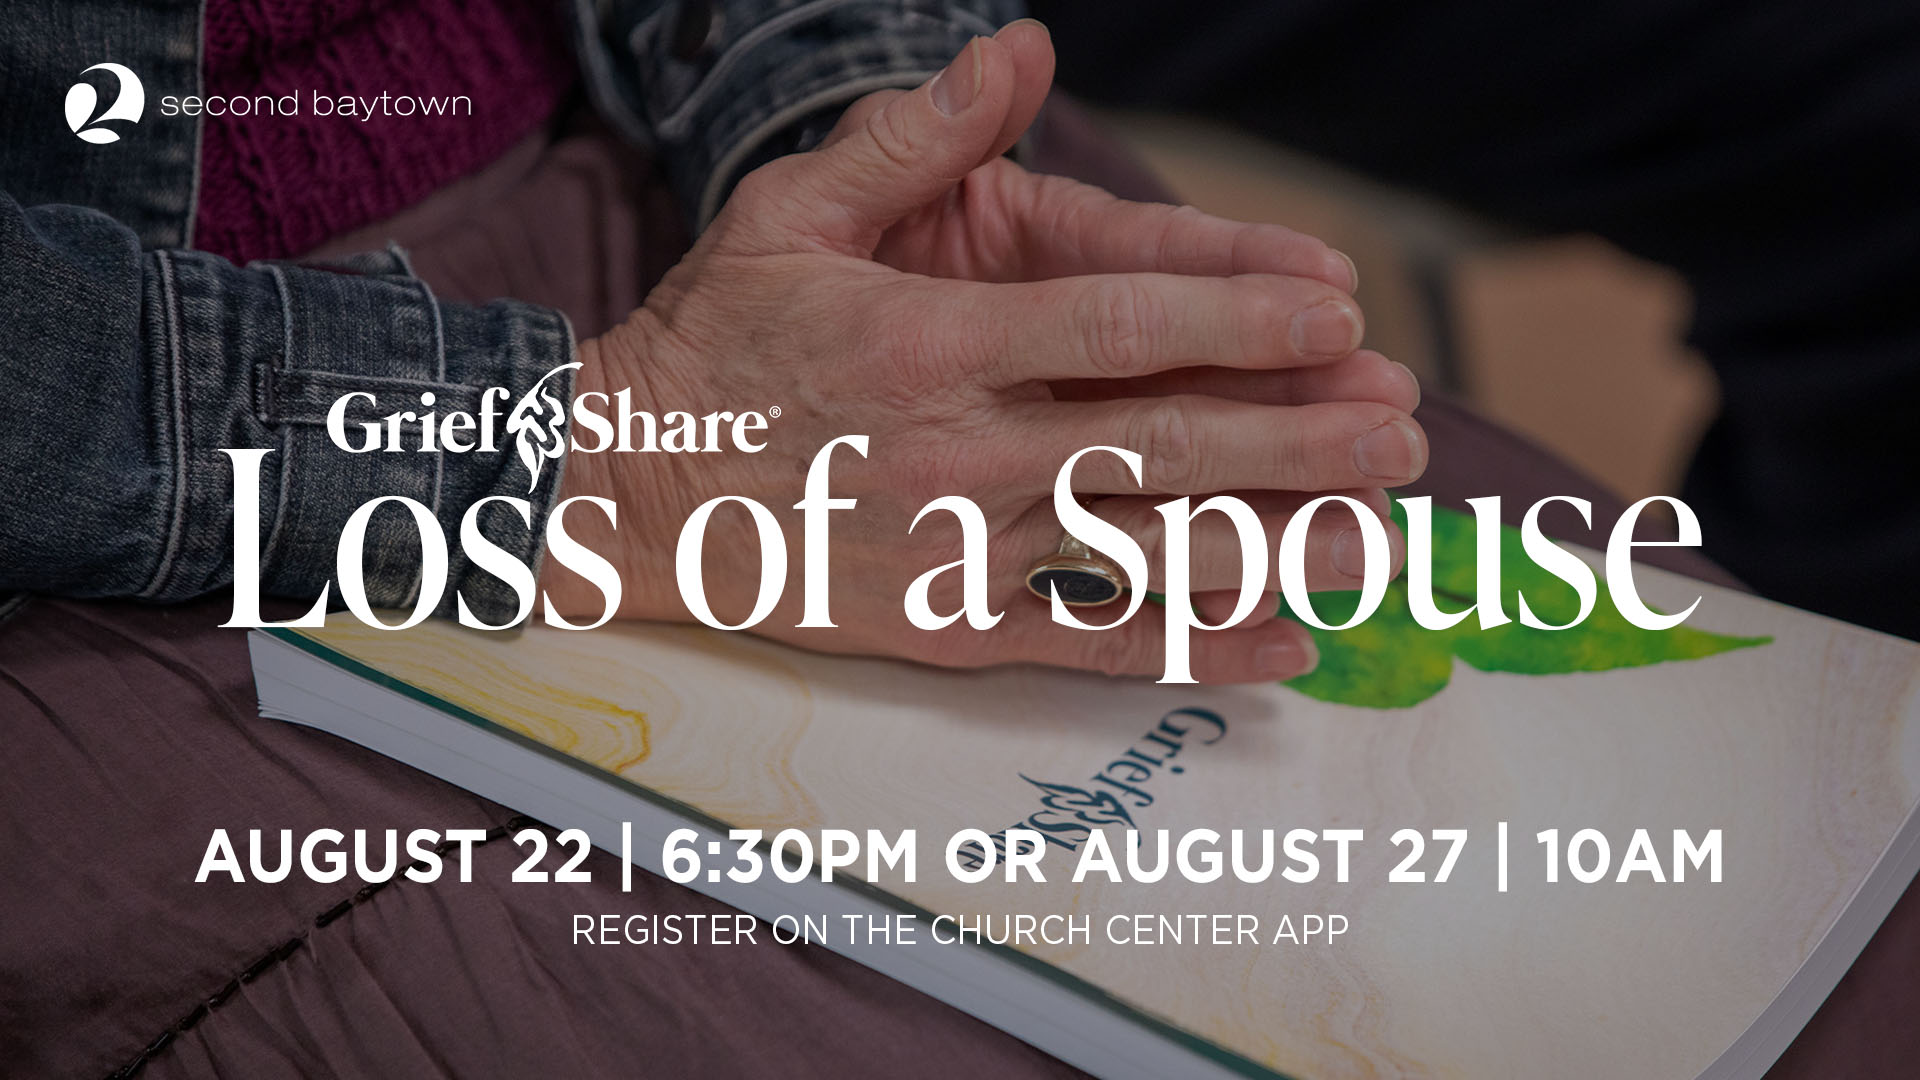 GriefShare: Loss of Spouse